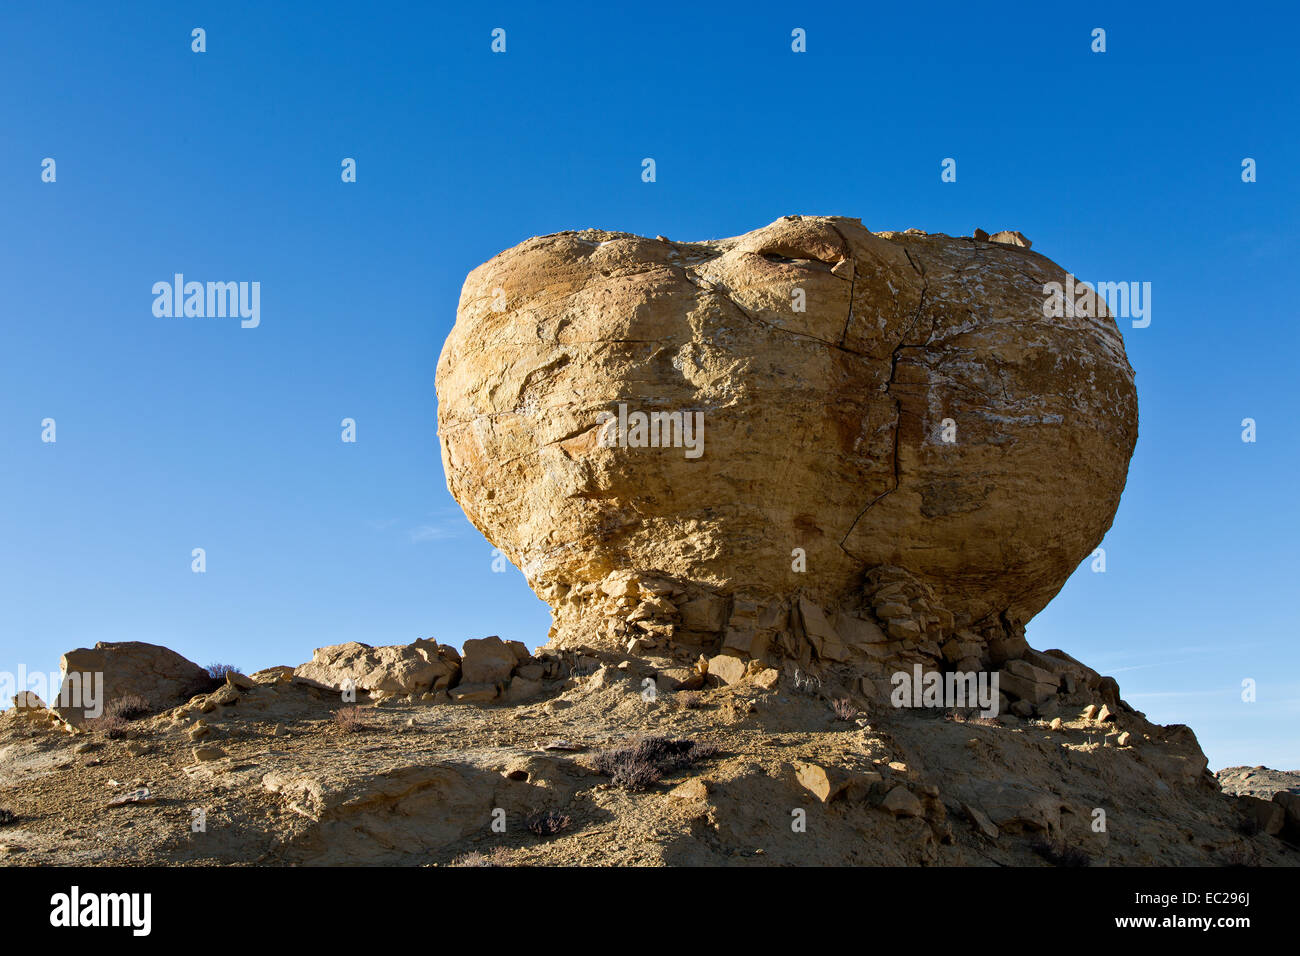 Sandstone formation 'Heart Of Stone'. Stock Photo